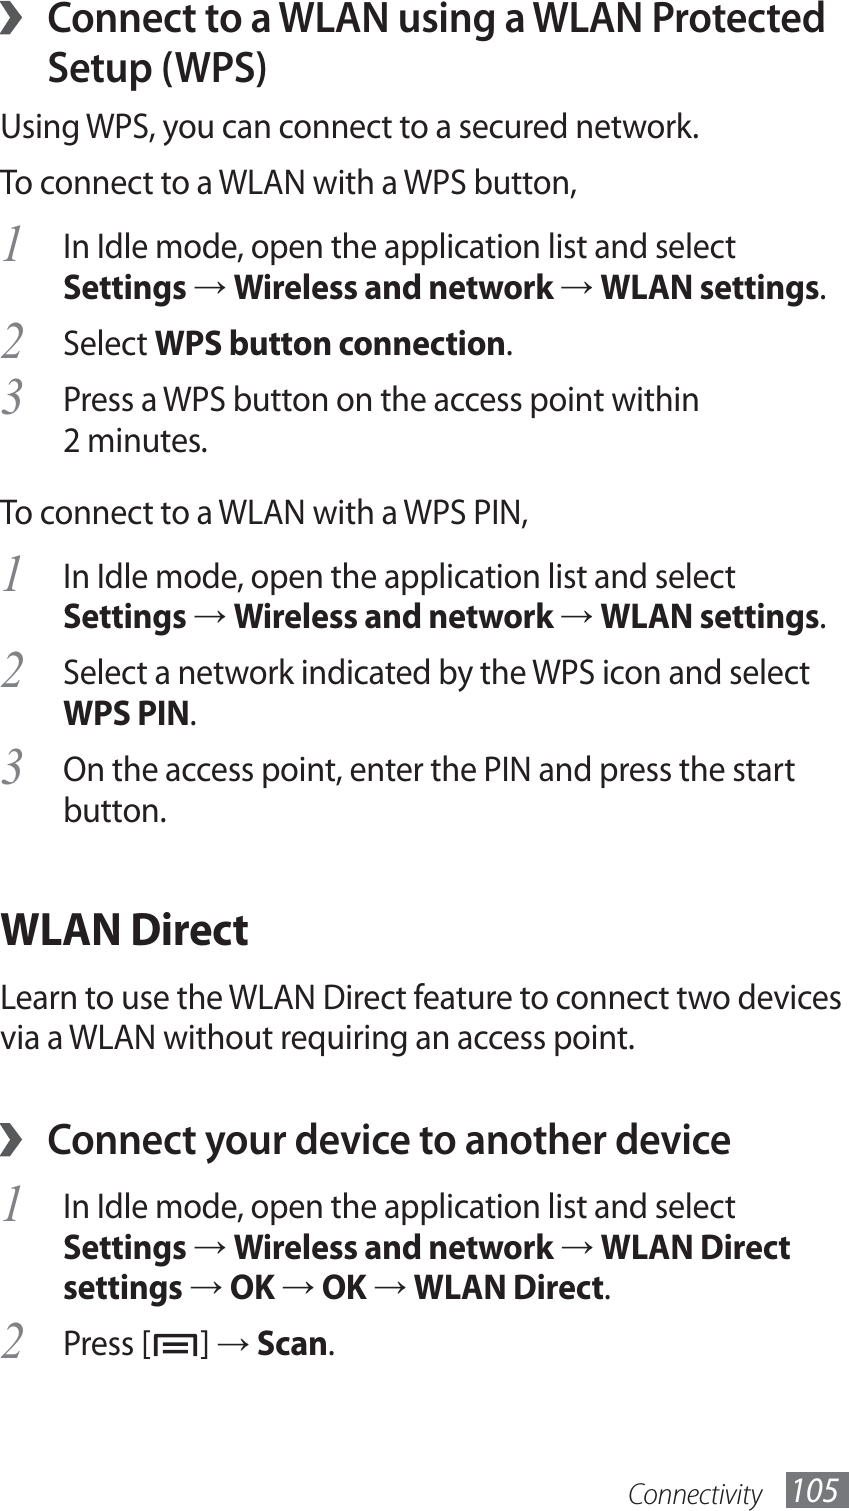 Connectivity 105 ›Connect to a WLAN using a WLAN Protected Setup (WPS)Using WPS, you can connect to a secured network. To connect to a WLAN with a WPS button,In Idle mode, open the application list and select 1 Settings → Wireless and network → WLAN settings.Select 2 WPS button connection.Press a WPS button on the access point within 3 2 minutes.To connect to a WLAN with a WPS PIN,In Idle mode, open the application list and select 1 Settings → Wireless and network → WLAN settings.Select a network indicated by the WPS icon and select 2 WPS PIN.On the access point, enter the PIN and press the start 3 button.WLAN DirectLearn to use the WLAN Direct feature to connect two devices via a WLAN without requiring an access point.Connect your device to another device ›In Idle mode, open the application list and select 1 Settings → Wireless and network → WLAN Direct settings → OK → OK → WLAN Direct.Press [2 ] → Scan.